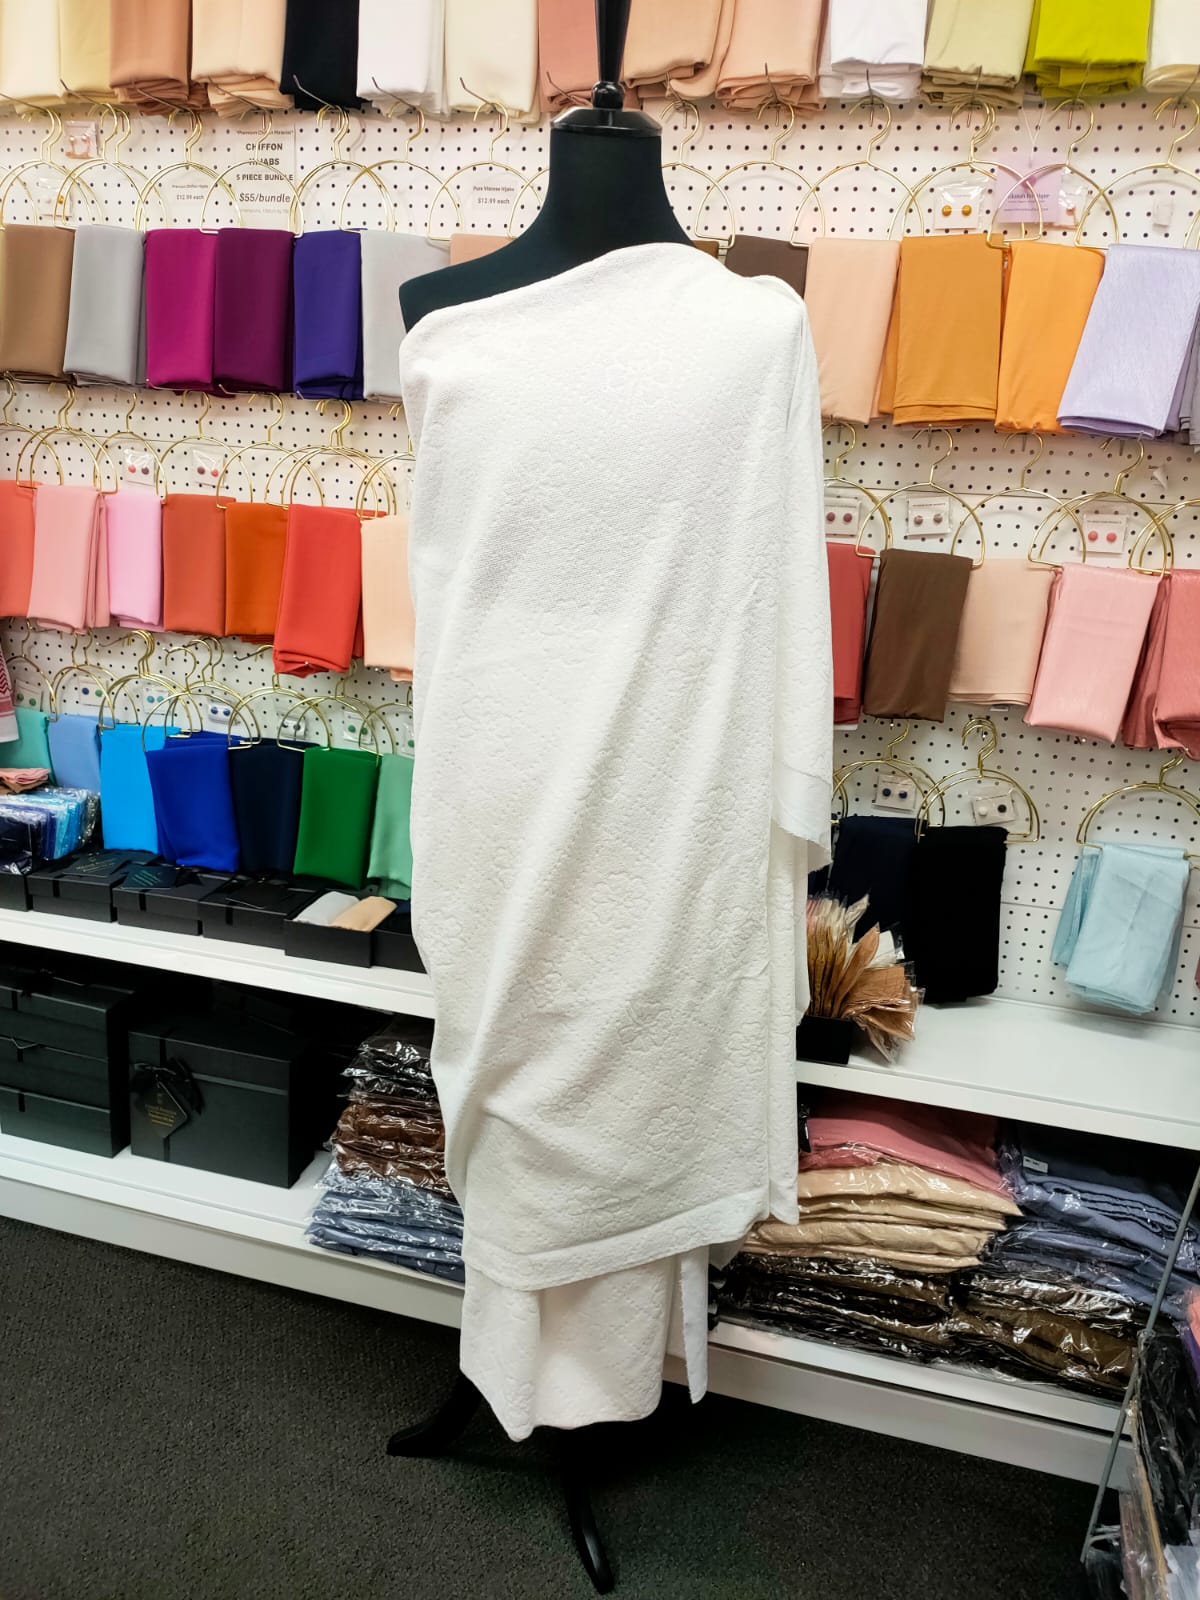 Discover the finest Ihram Hajj & Umrah at Hikmah Boutique. It's a 2-piece set made from quality Micro-Fibre material measuring 210cm by 105cm. Shop online for high-quality Ihram. Elevate your pilgrimage experience with our premium Ihram.